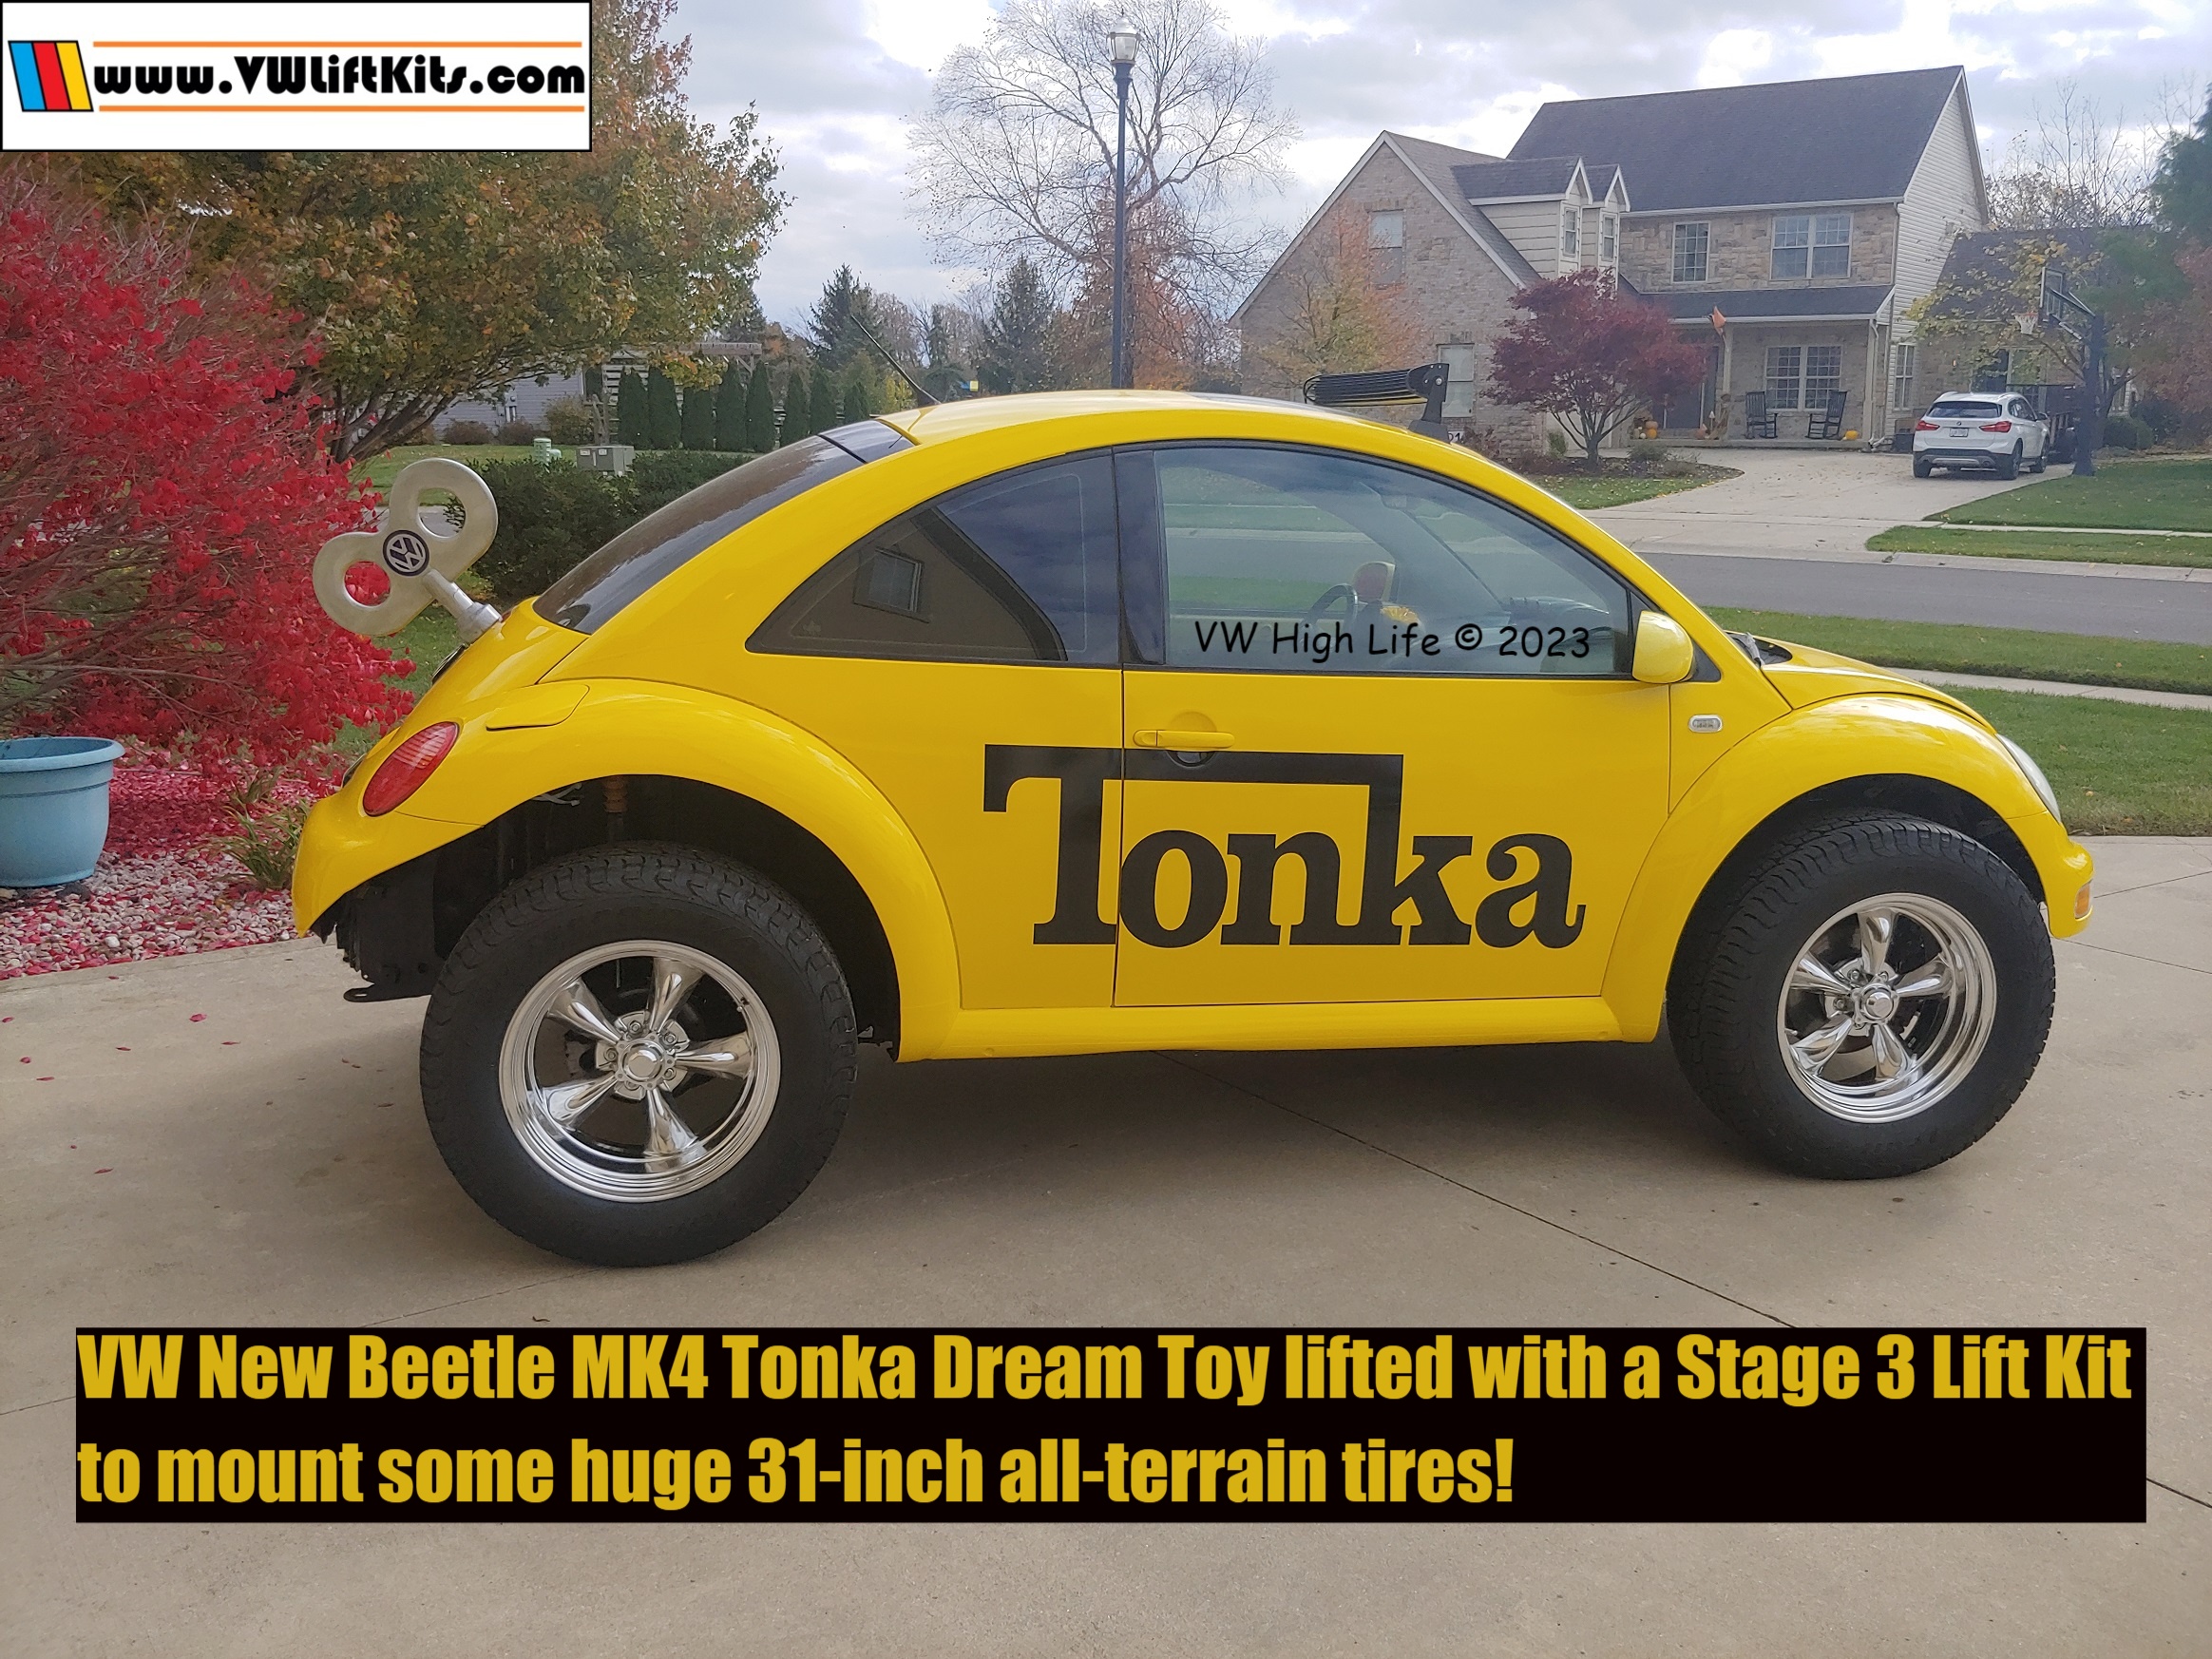 Albert transformed his MK4 Beetle into a Tonka Toy using our Stage 3 Lift Kit and rally style skid plate!